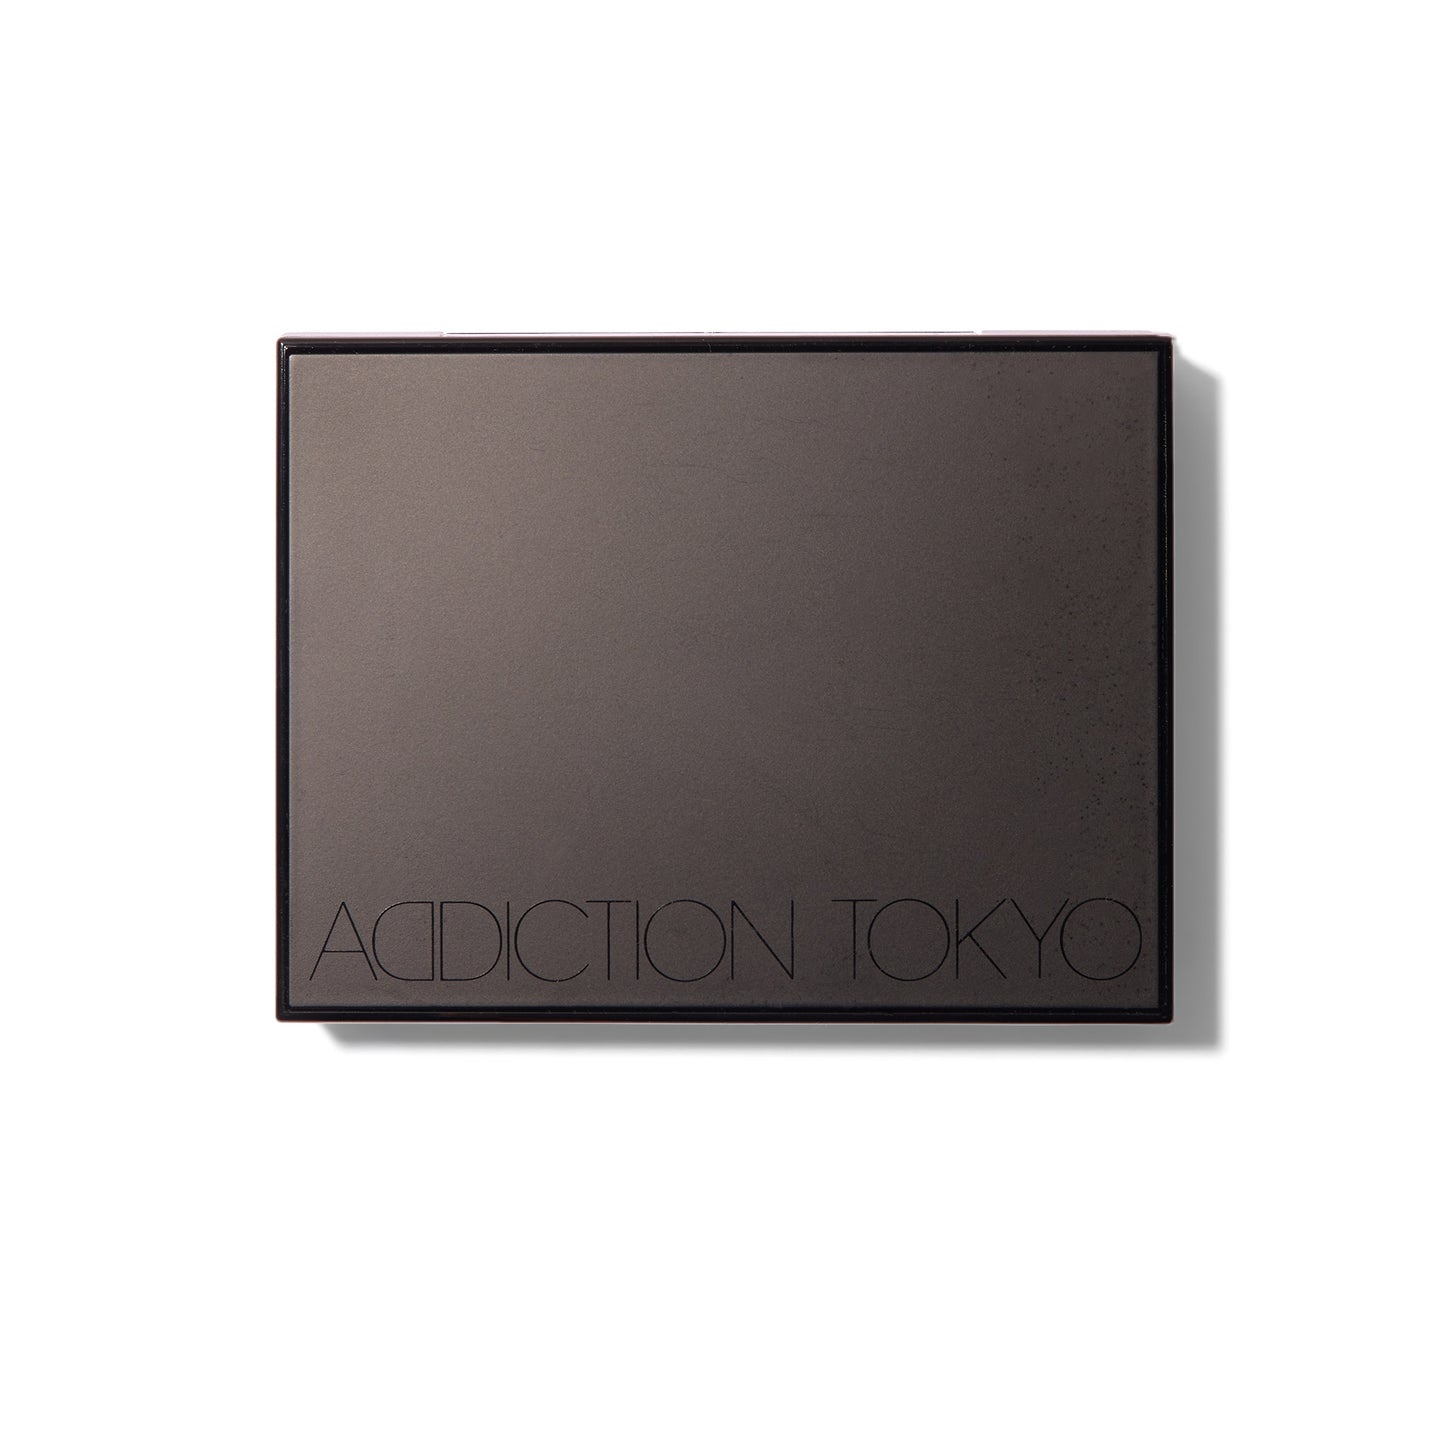 The black Compact Case II, closed, with Addiction Tokyo logo on the front.